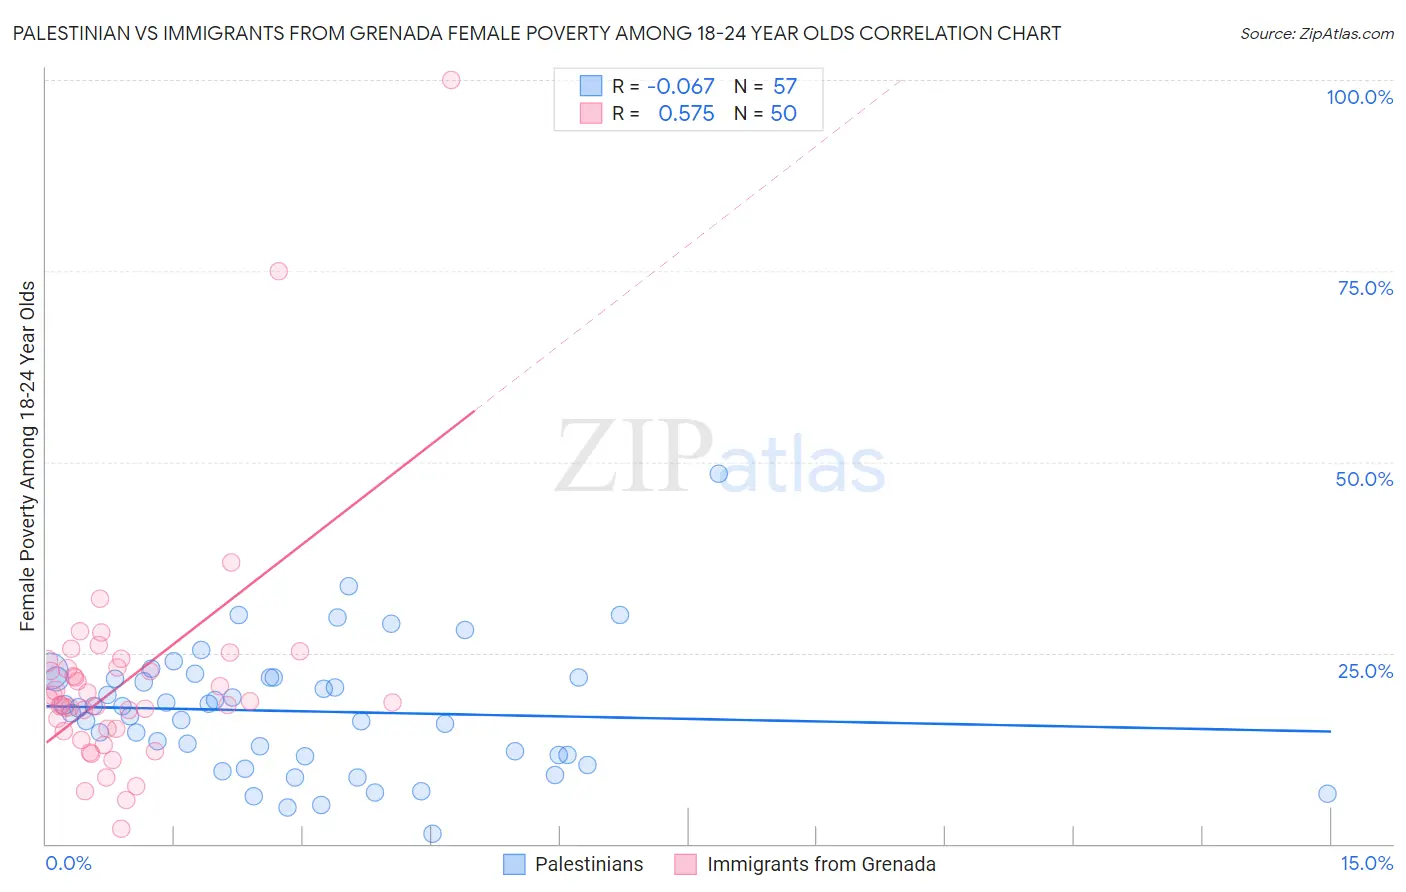 Palestinian vs Immigrants from Grenada Female Poverty Among 18-24 Year Olds